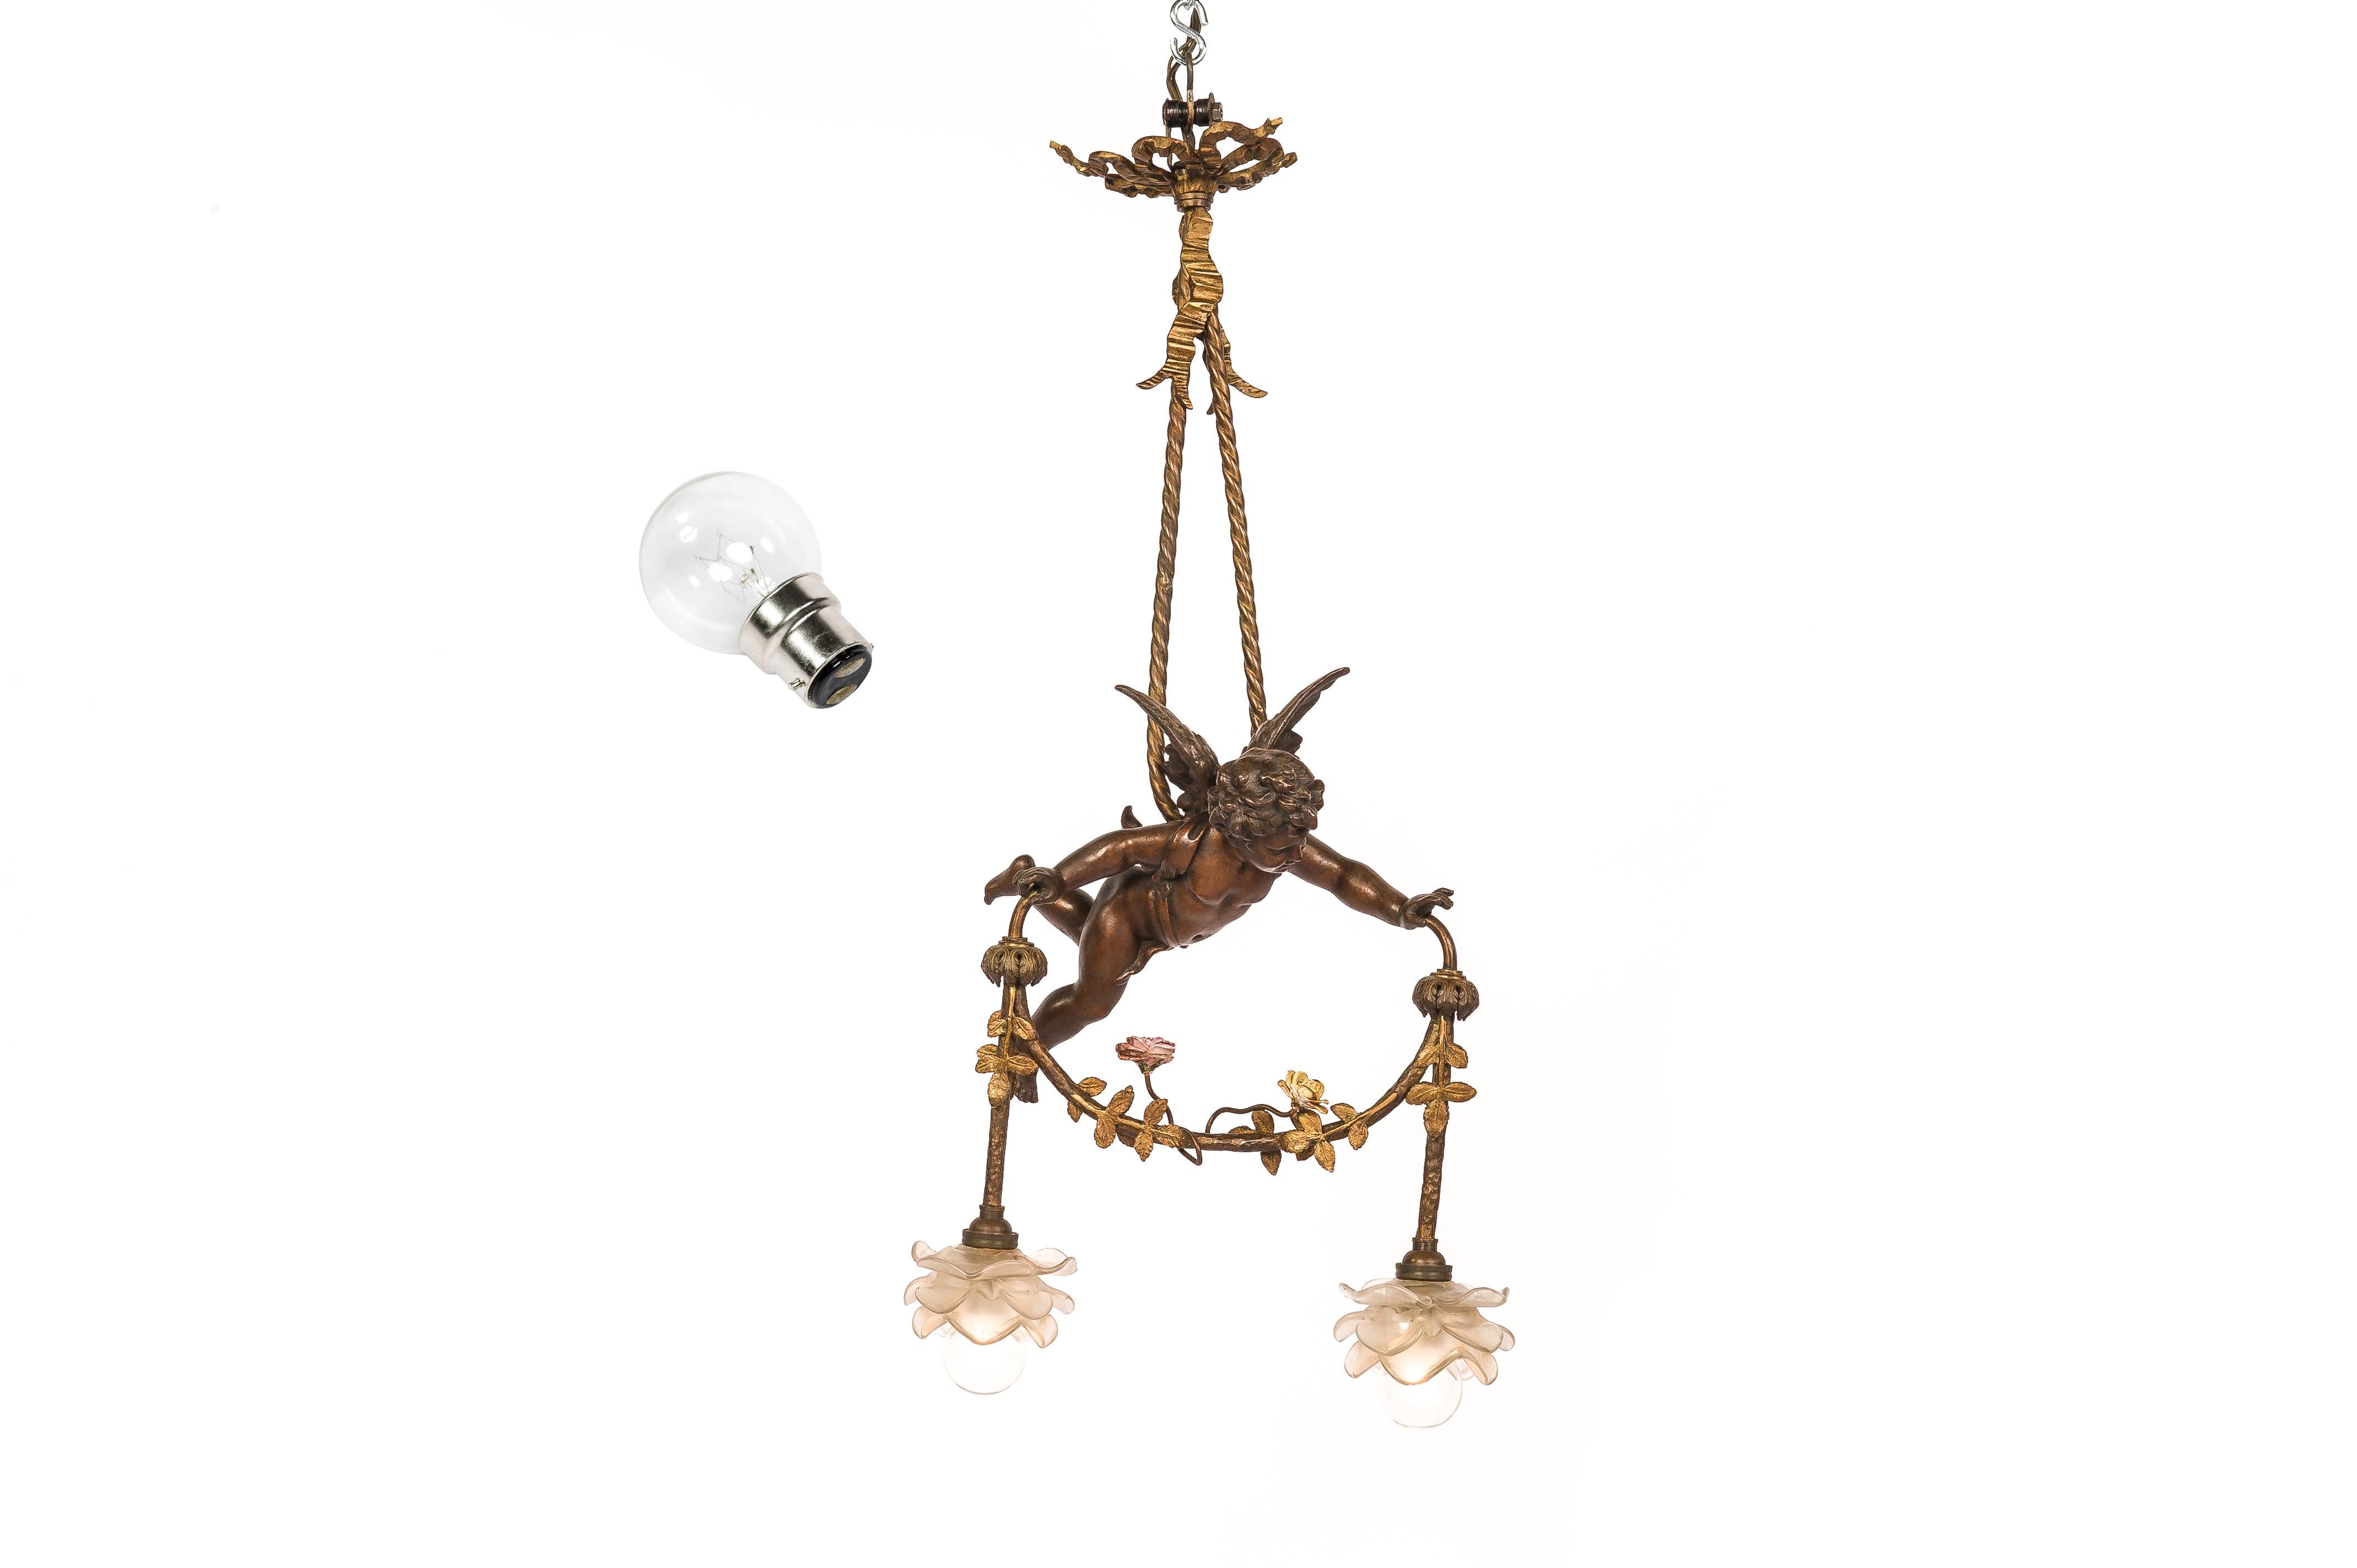 Antique 19th-Century French Brass Angel or Putti Pendant Light with Floral Garla 1